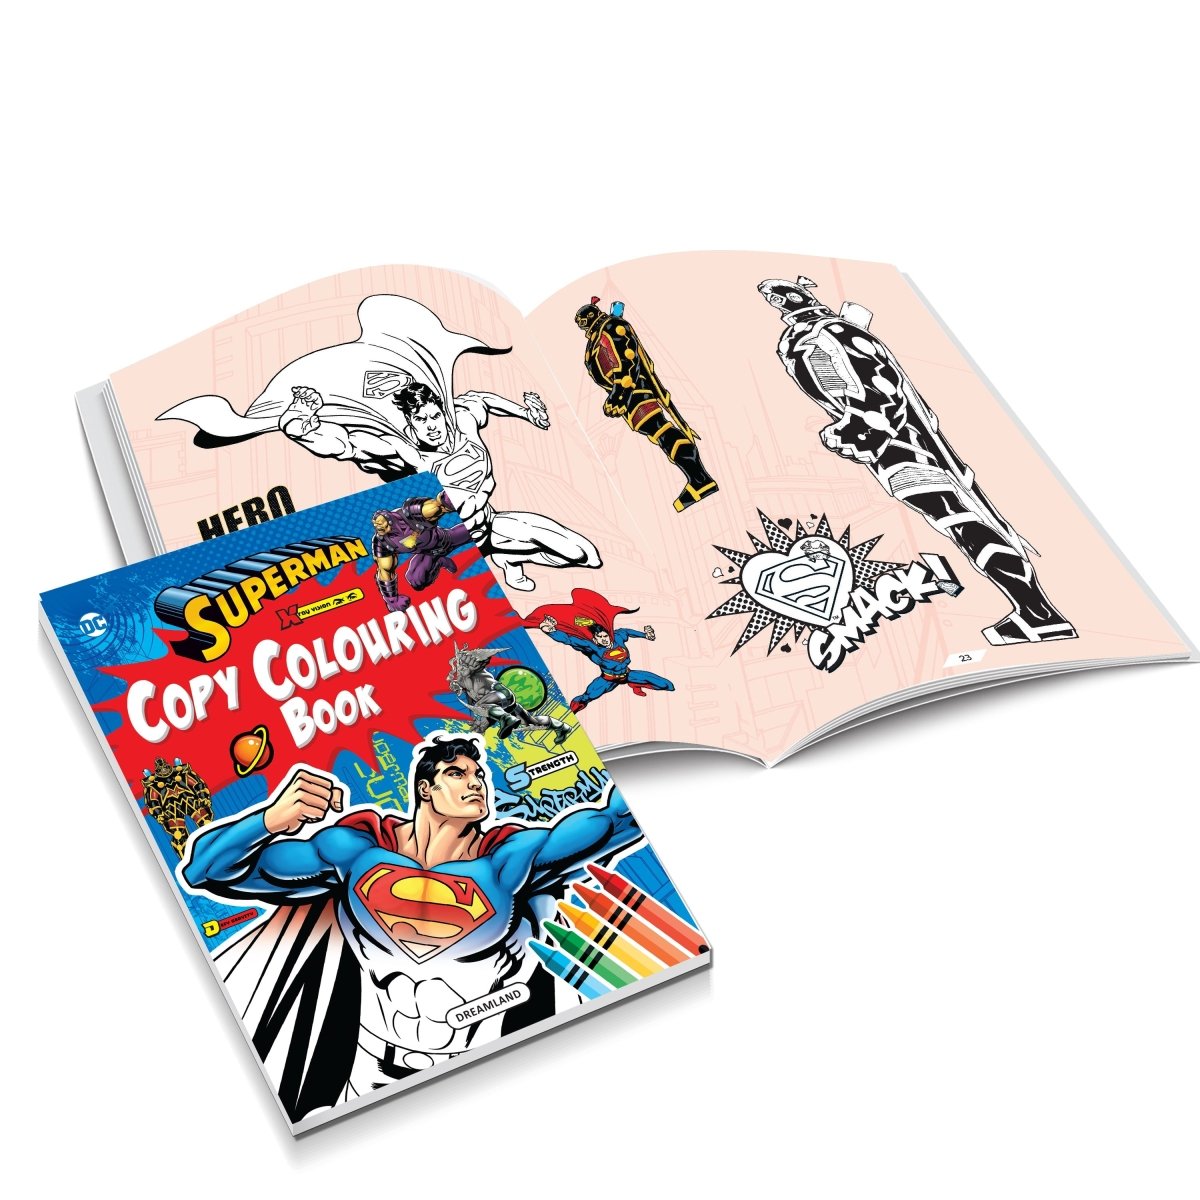 Dreamland Publications Superman Copy Colouring And Activity Books Pack (A Pack of 5 Books) - 9789394767843